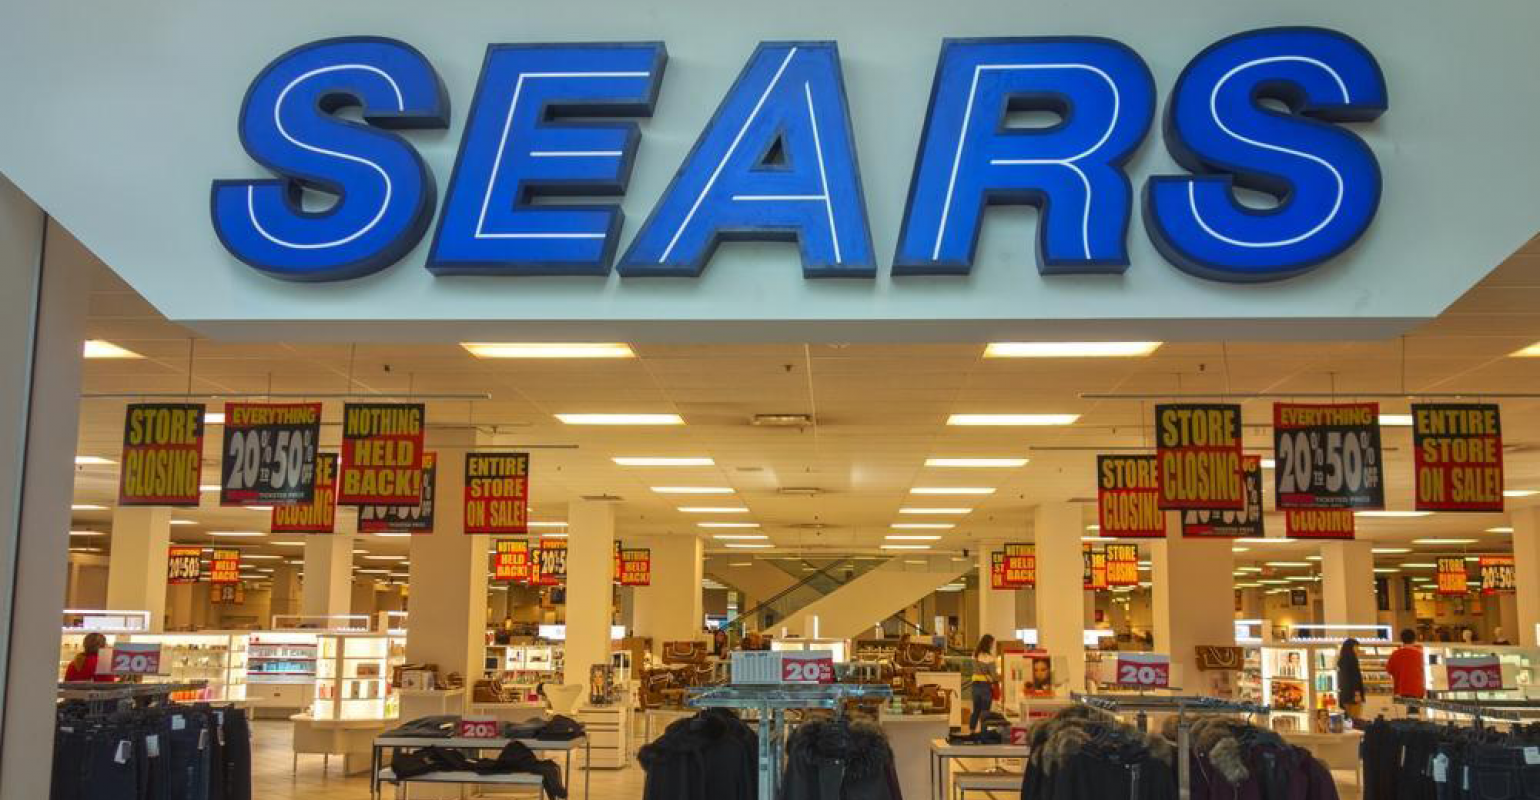 SEARS: Shop Sears for appliances, tools, clothing, mattresses & more. Great name brands like Kenmore, Craftsman Tools, Serta, Diehard and many others.